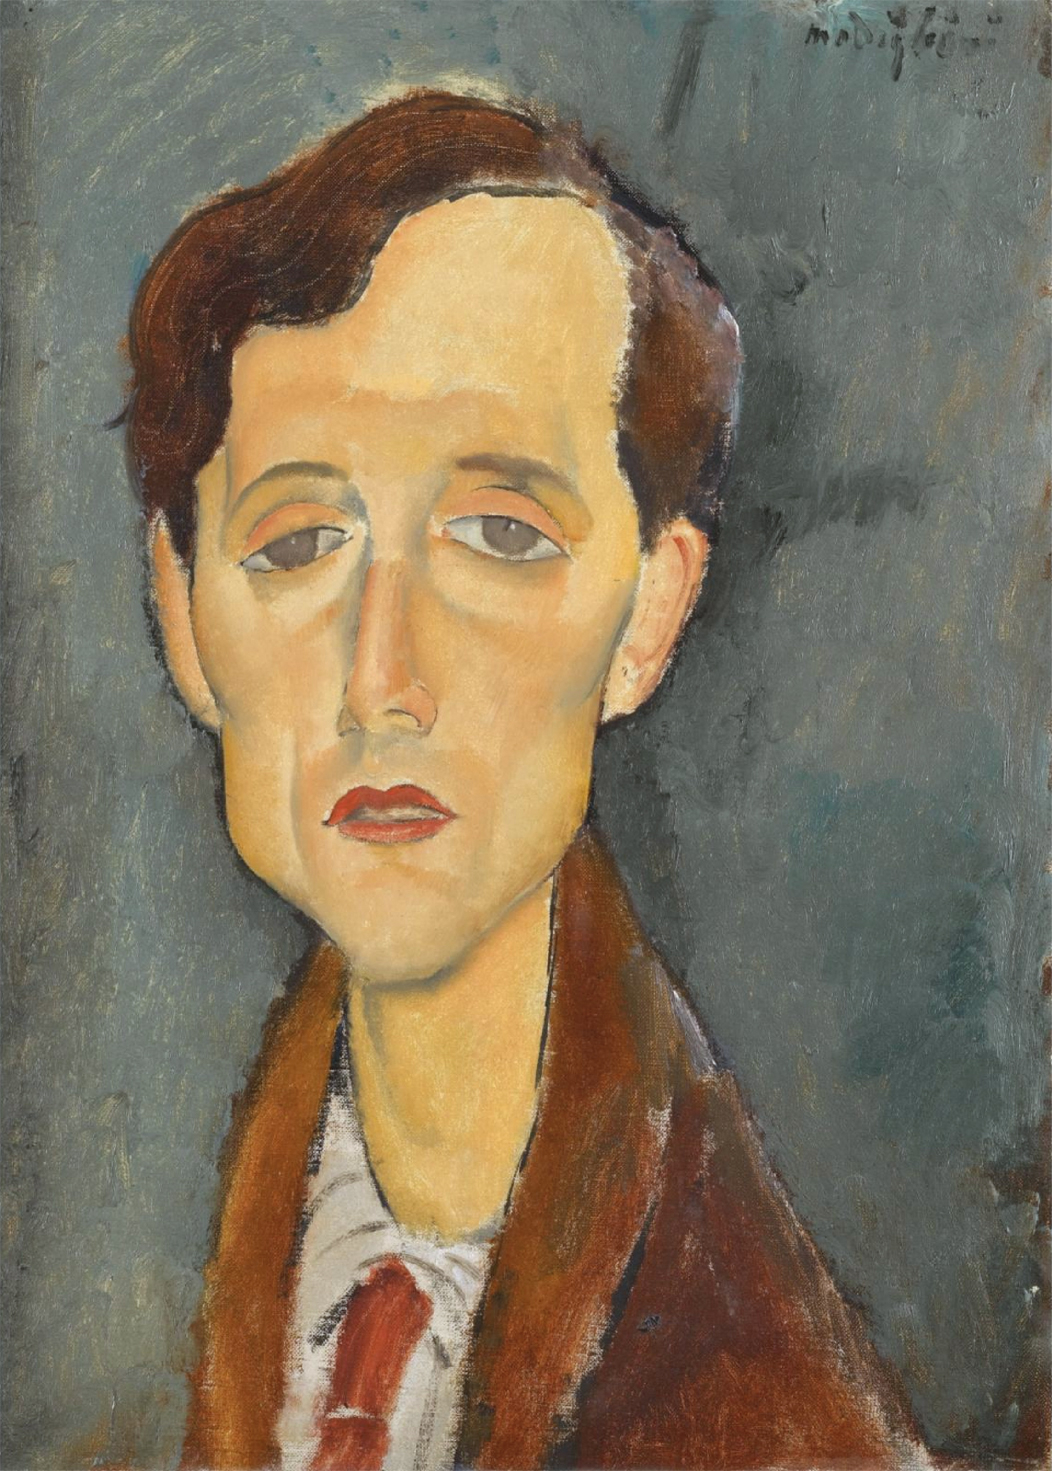 Frans Hellens by Amedeo Modigliani - 1919 - 46 x 34cm collection privée